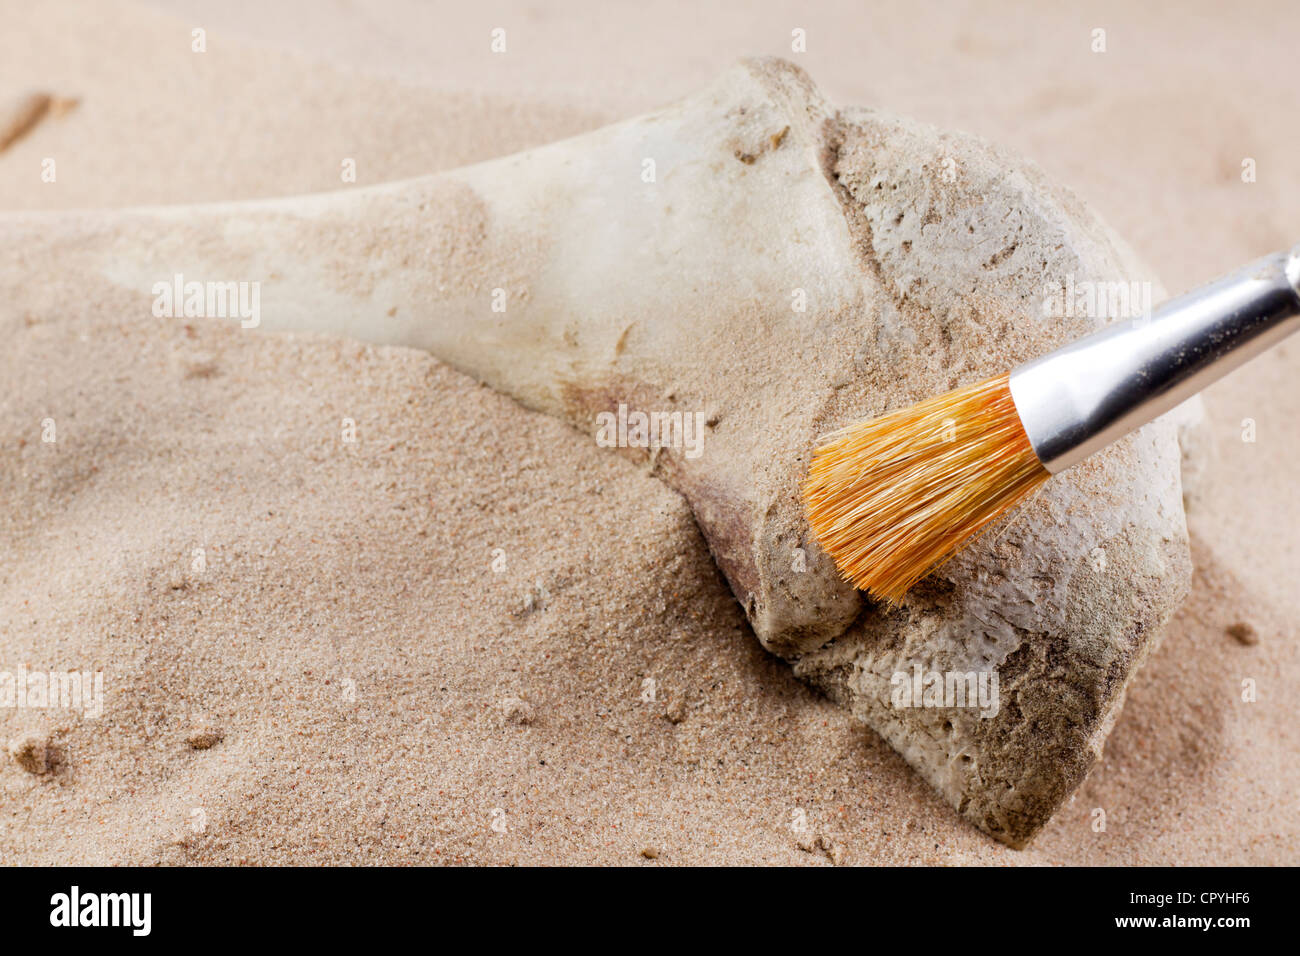 Archeology and forensics bones in sand with brush Stock Photo